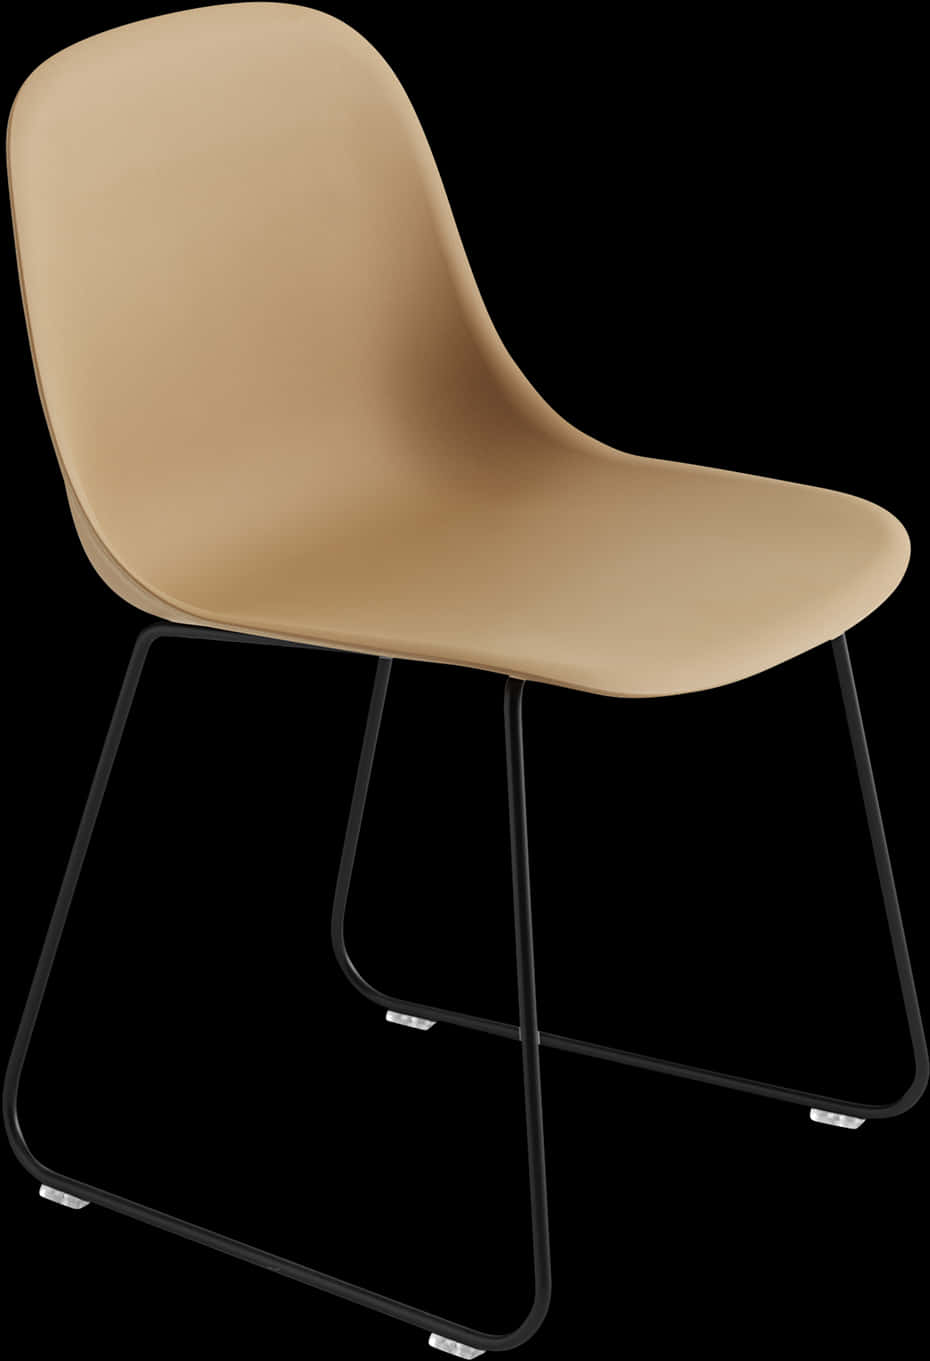 A Chair With Black Legs